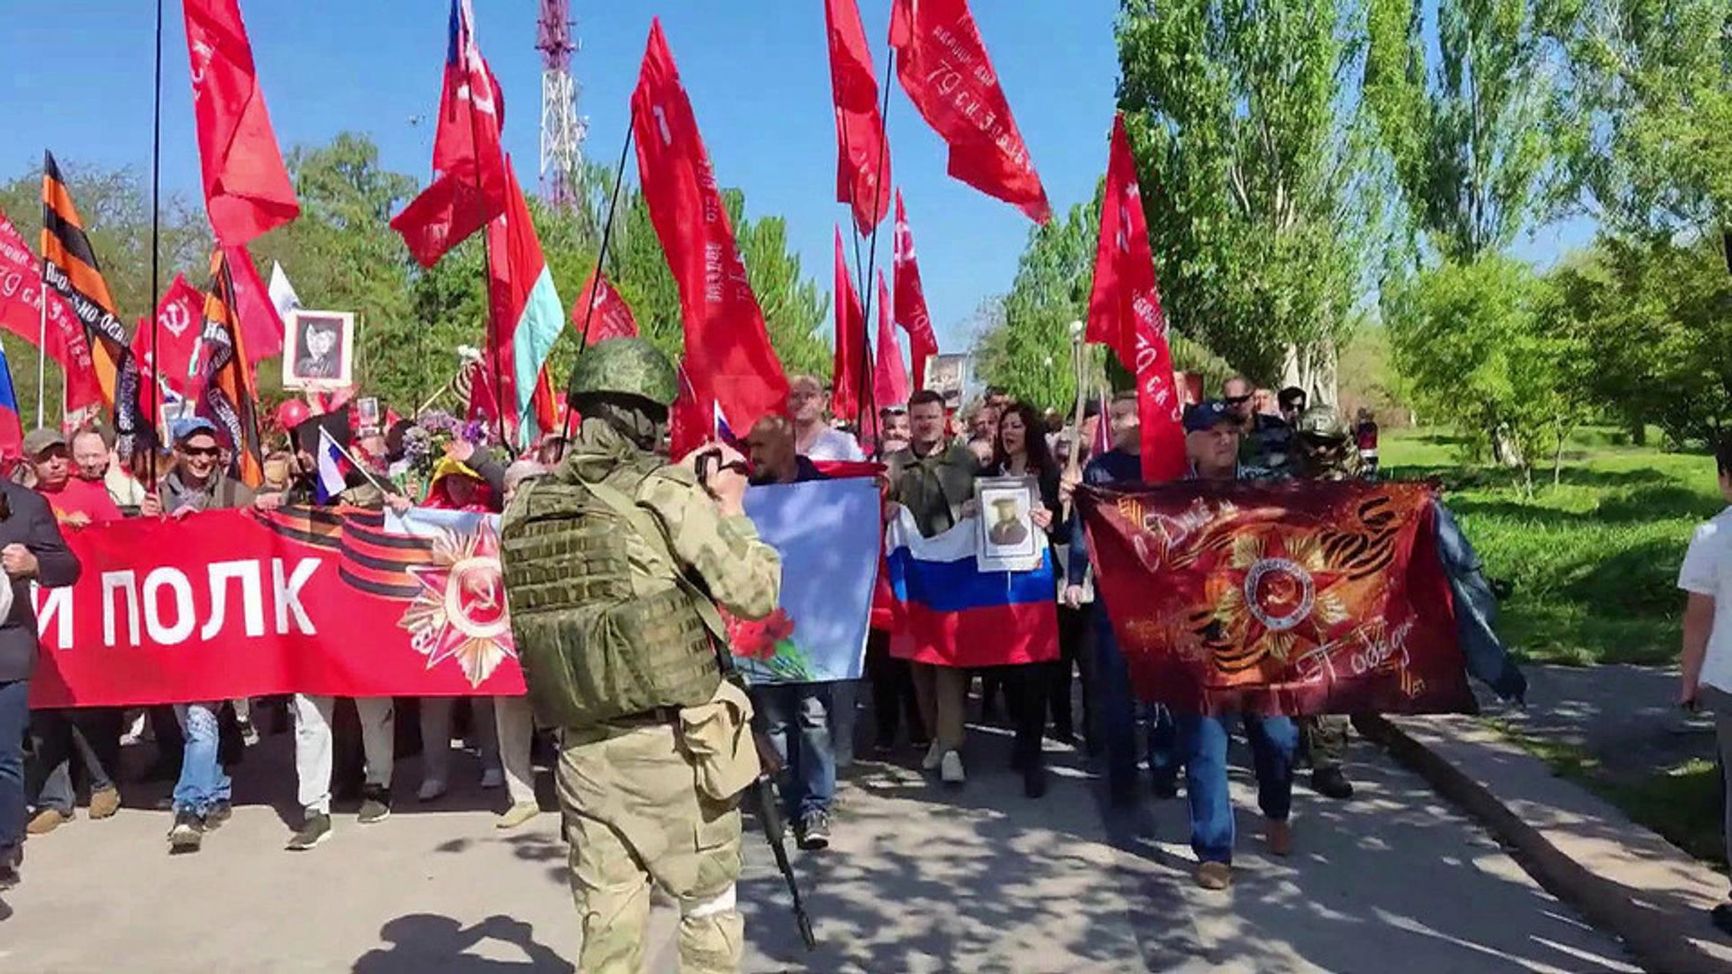 Victory Day parade in occupied Kherson, May 9, 2022